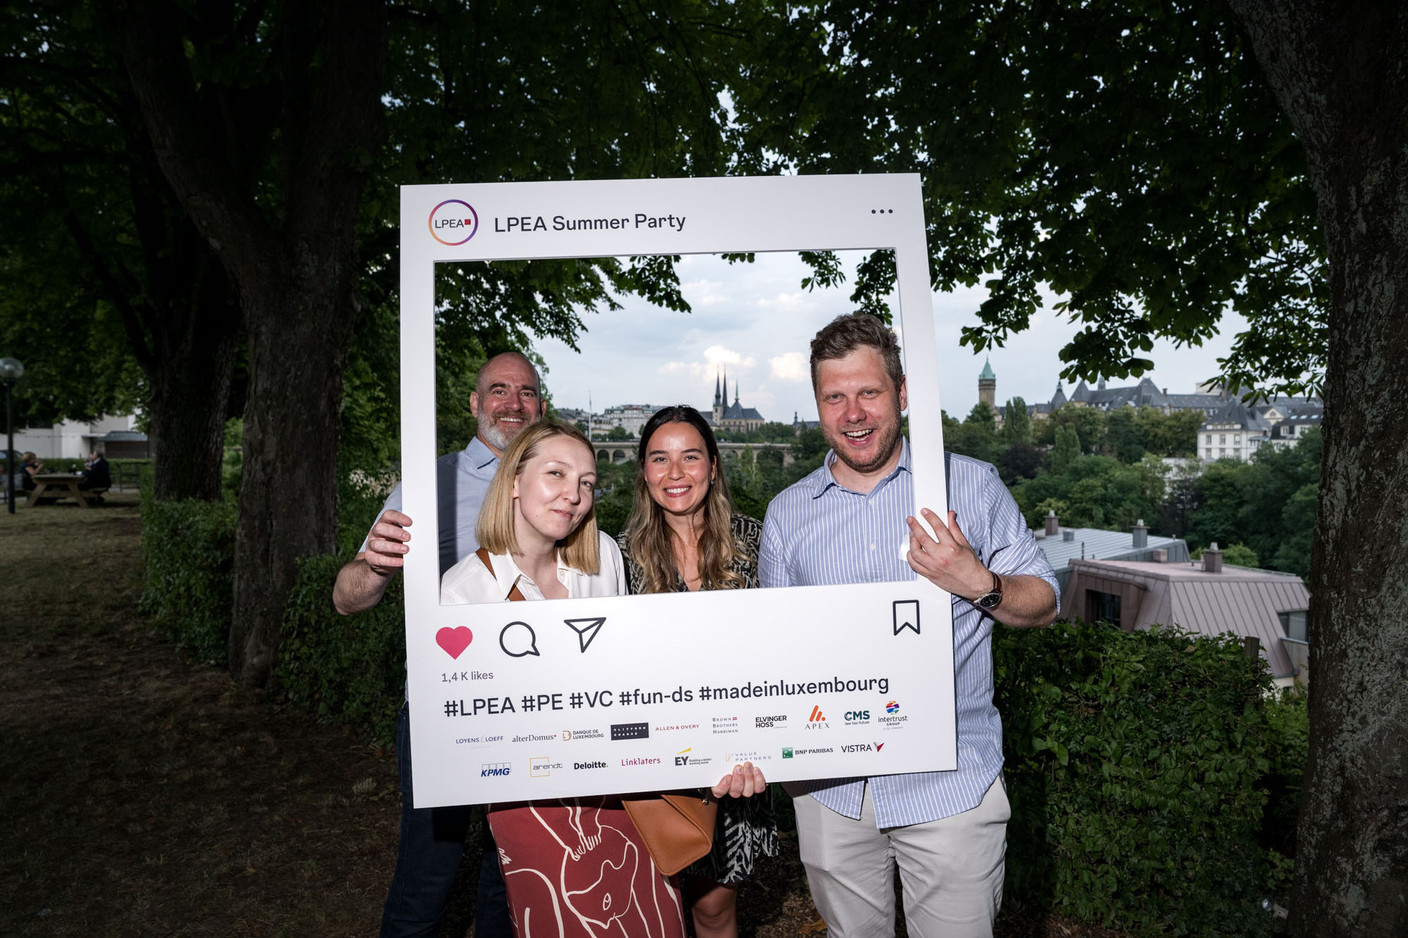 Neil Scoble (Cascade), Ekaterina Lebedeva & Merve Kirca (Loyens & Loeff) and Maciej Waloszyk (Cascade) at the Luxembourg Private Equity and Venture Capital Association’s (LPEA) summer party, held on 11 July at the Hotel Parc Belle-Vue in Luxembourg City. Photo: Nader Ghavami